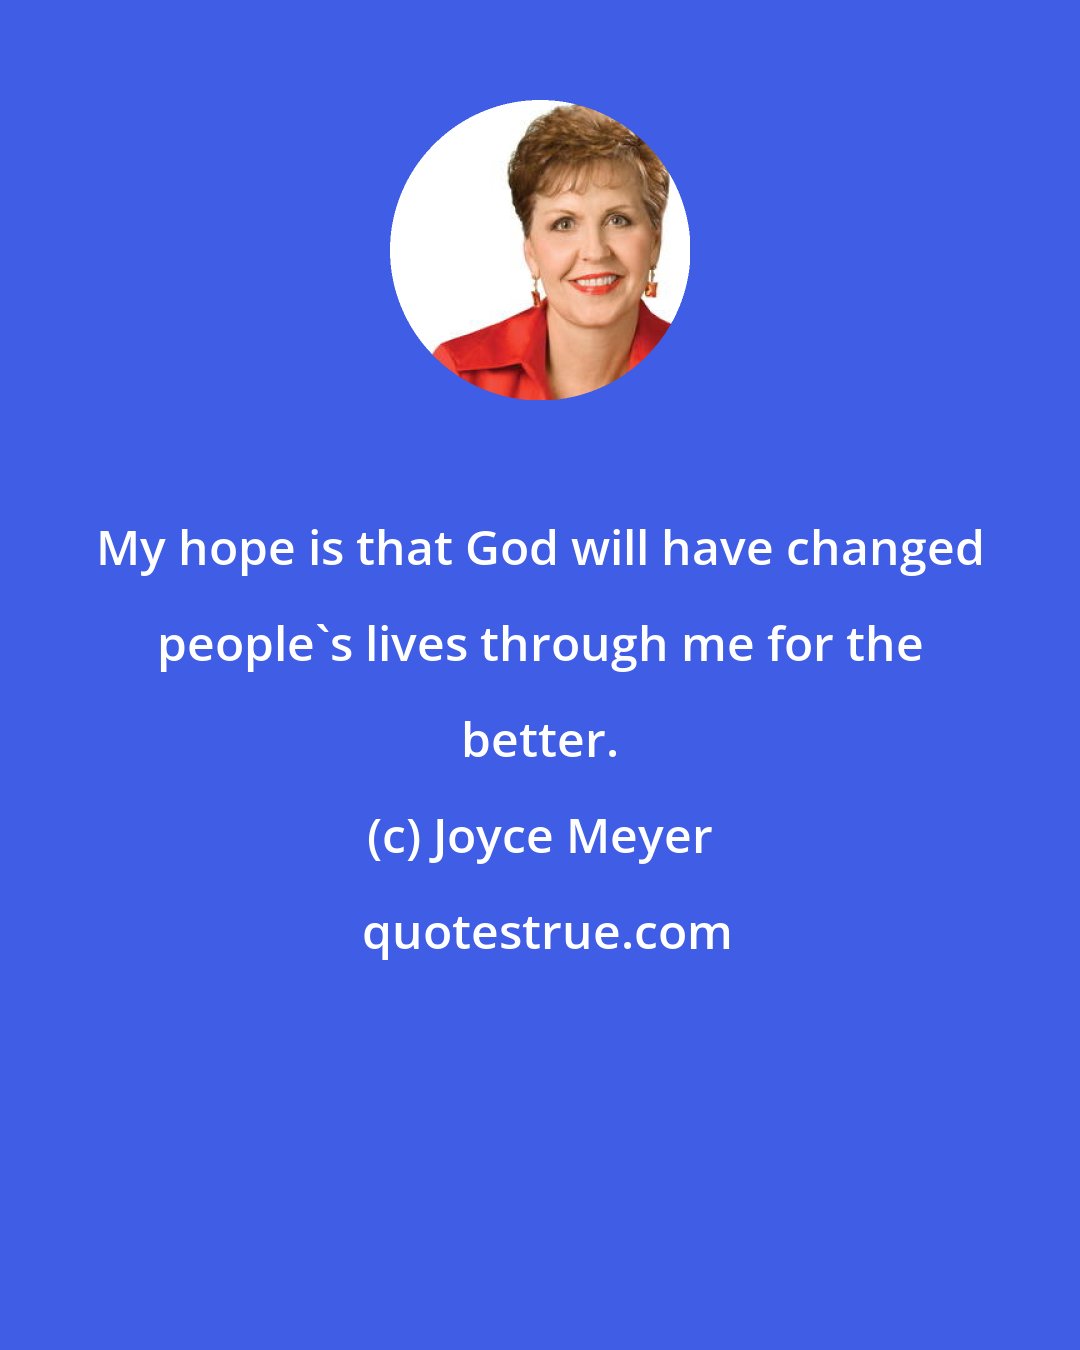 Joyce Meyer: My hope is that God will have changed people's lives through me for the better.